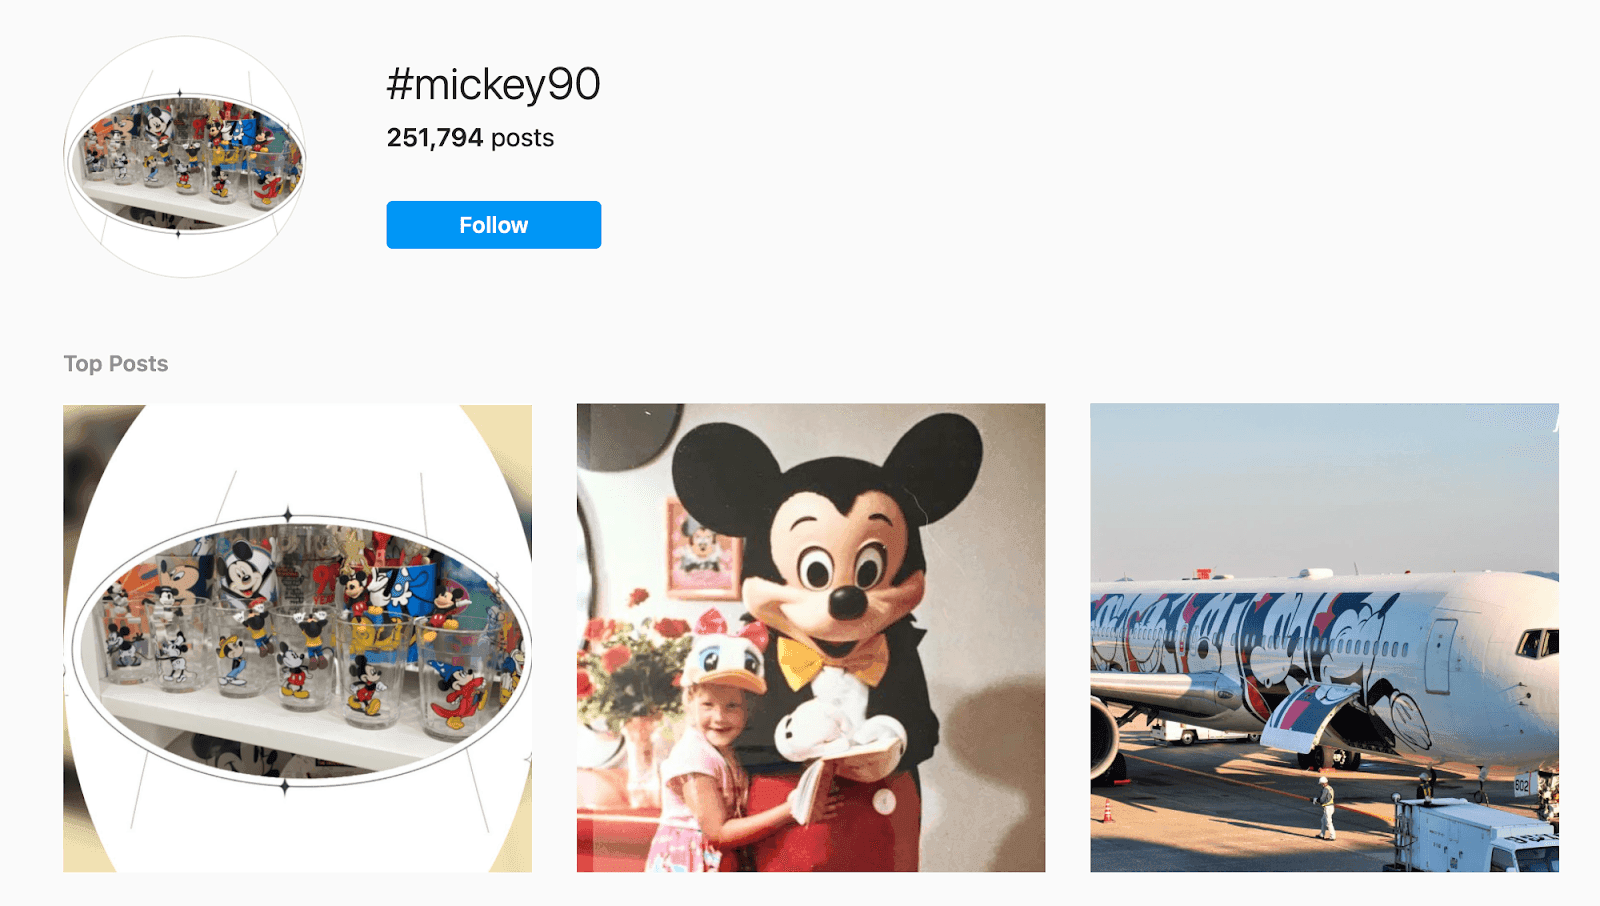 #mickey90 hashtag to celebrate the character's 90th birthday